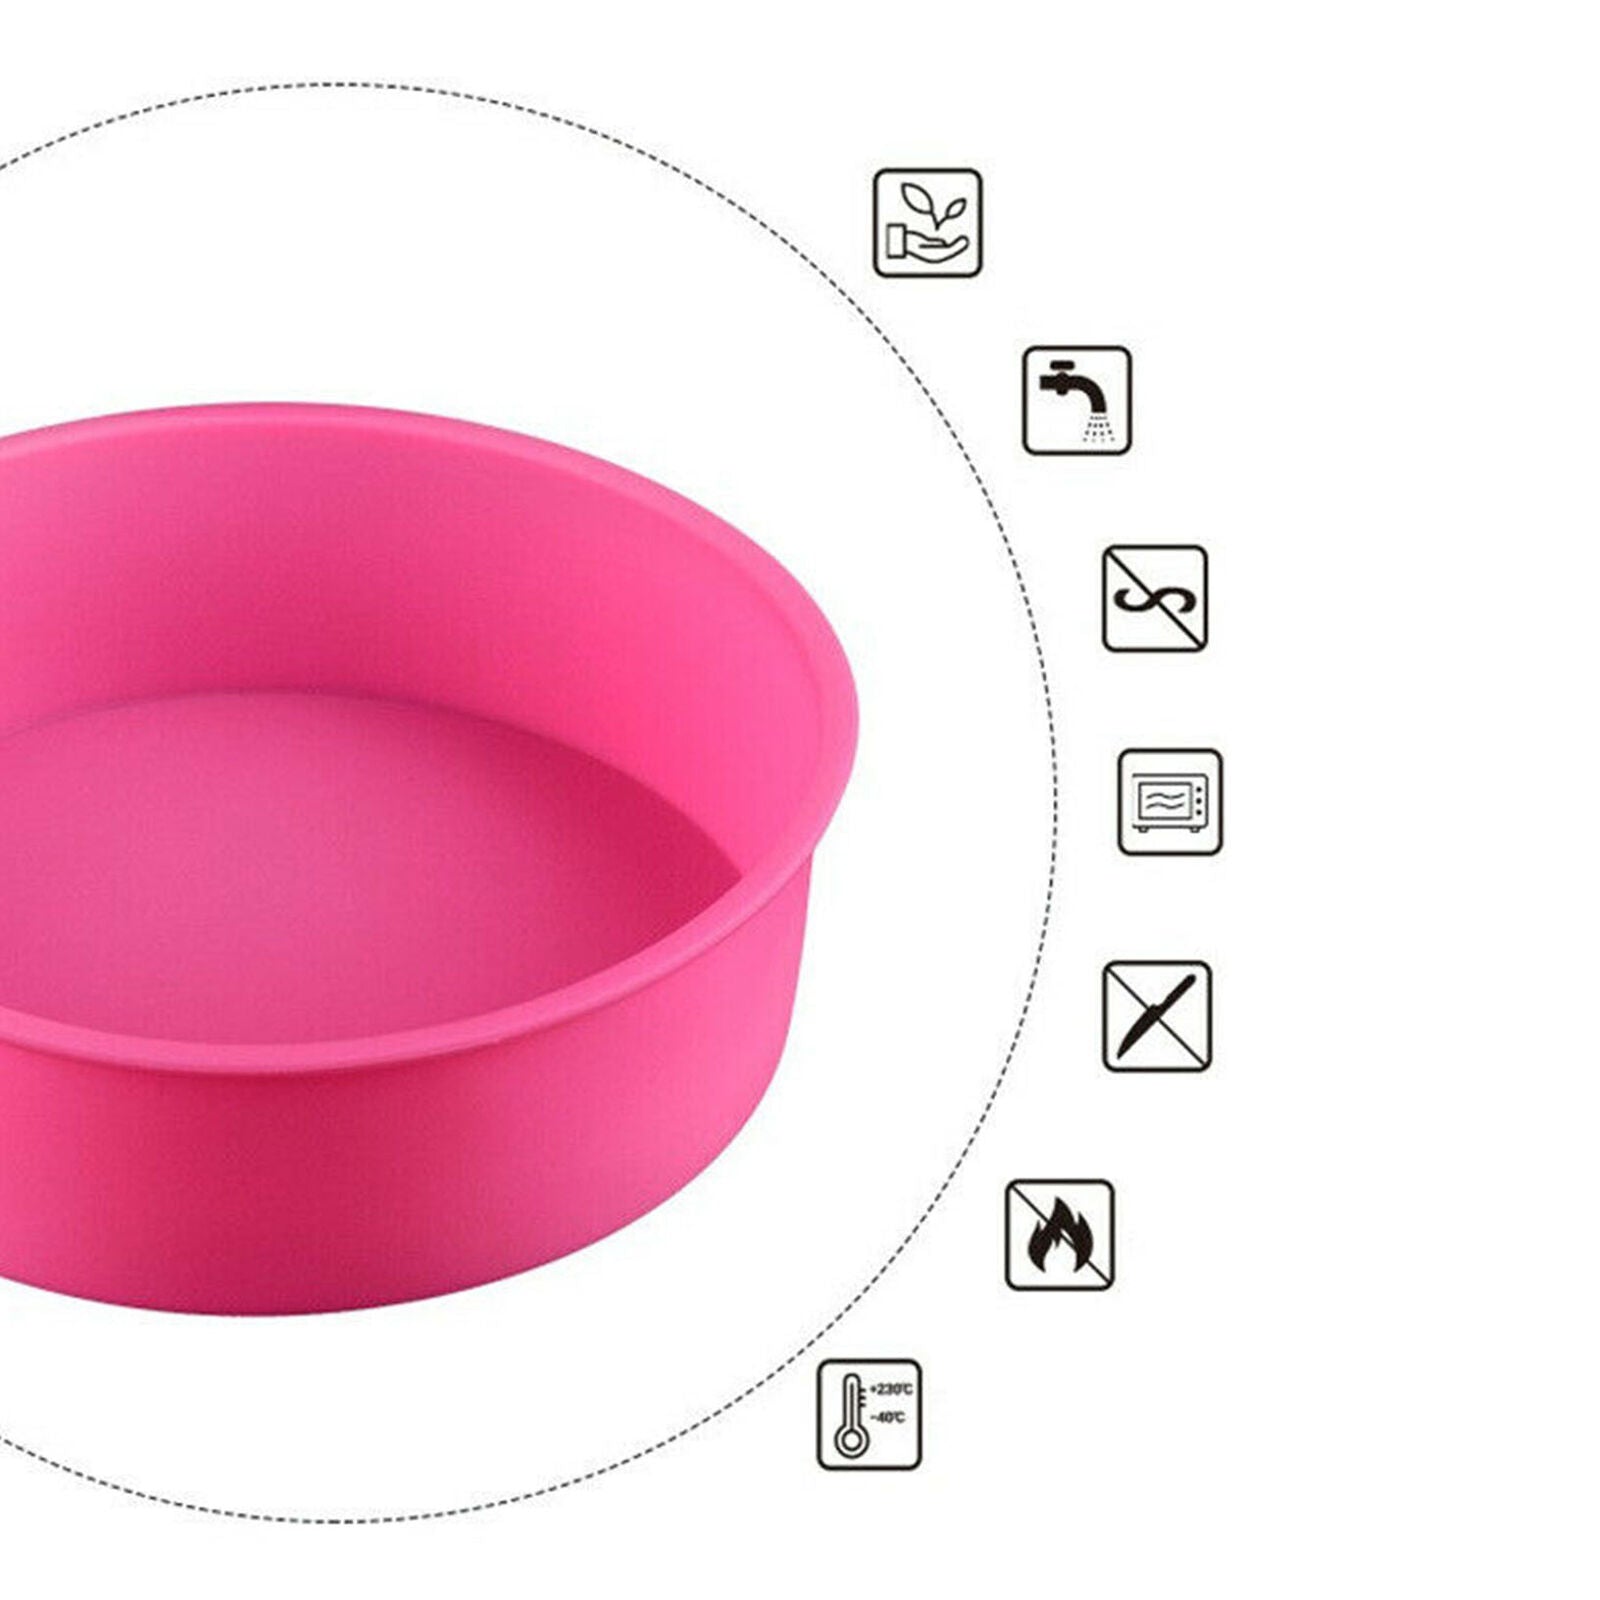 8 Inch Silicone Round Non-stick Cake Pan Bread Baking Mould Tray For Kitchen